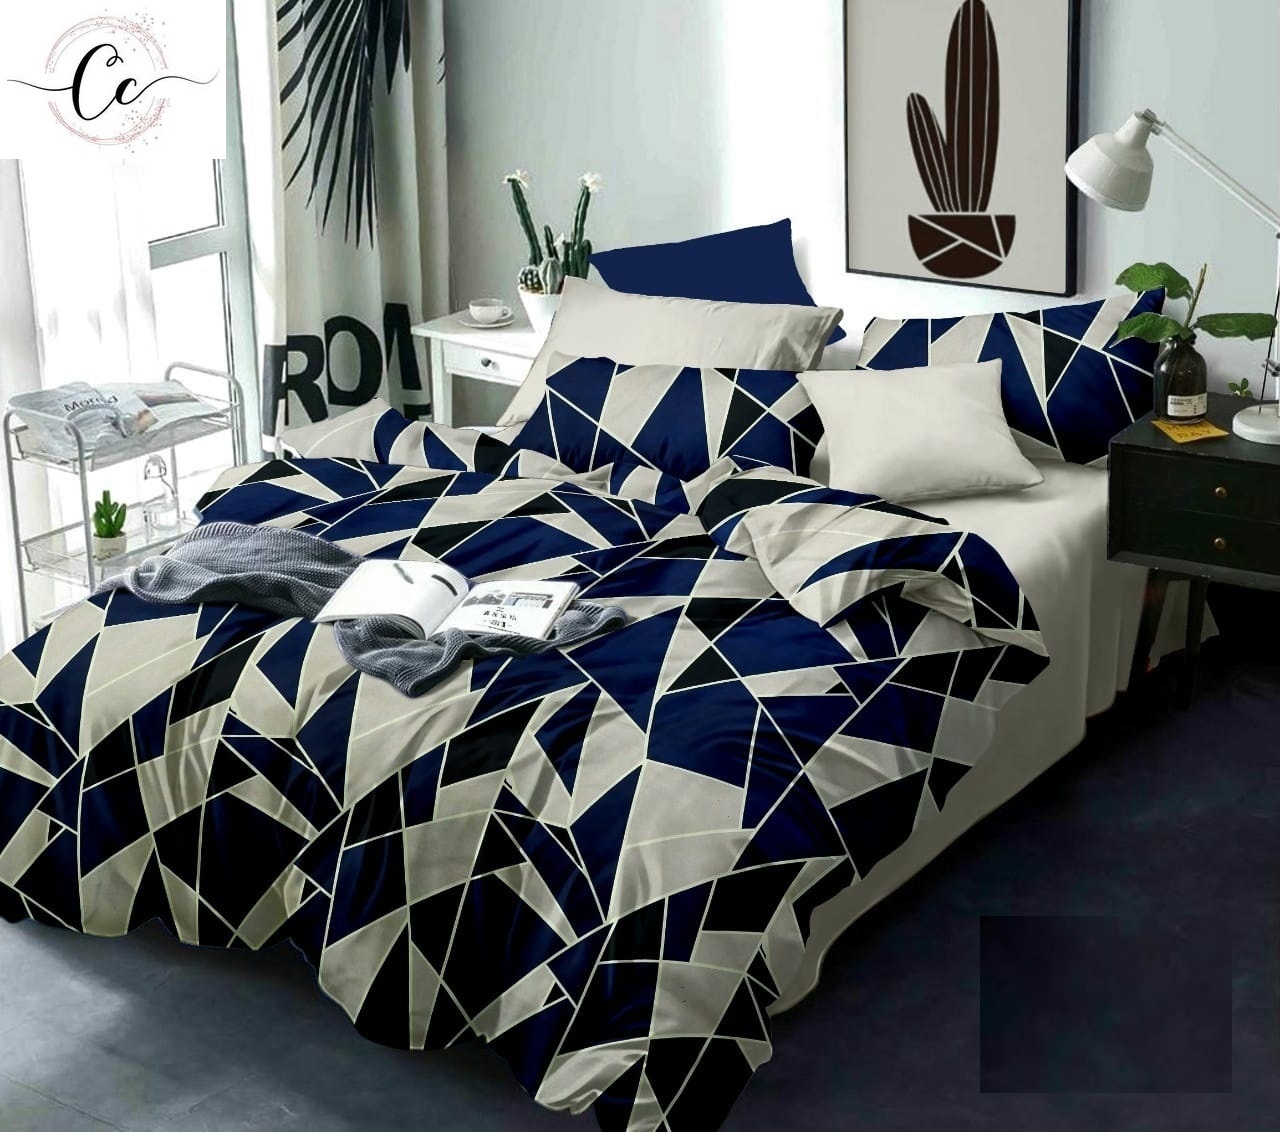 Buy Gold Bedsheets Online at Best Prices In India- By Choco Creation